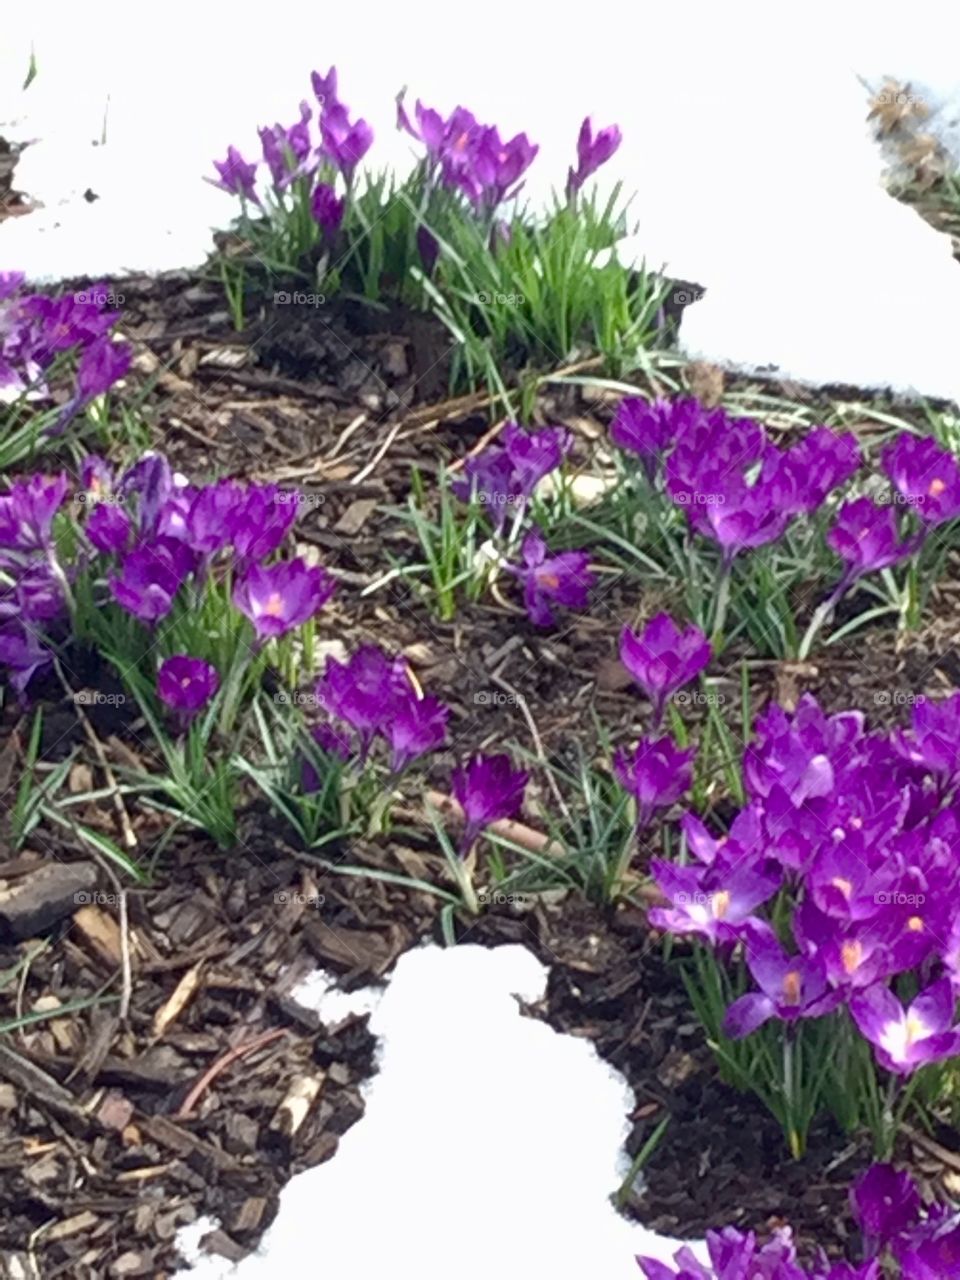 Flowers in the snow. 